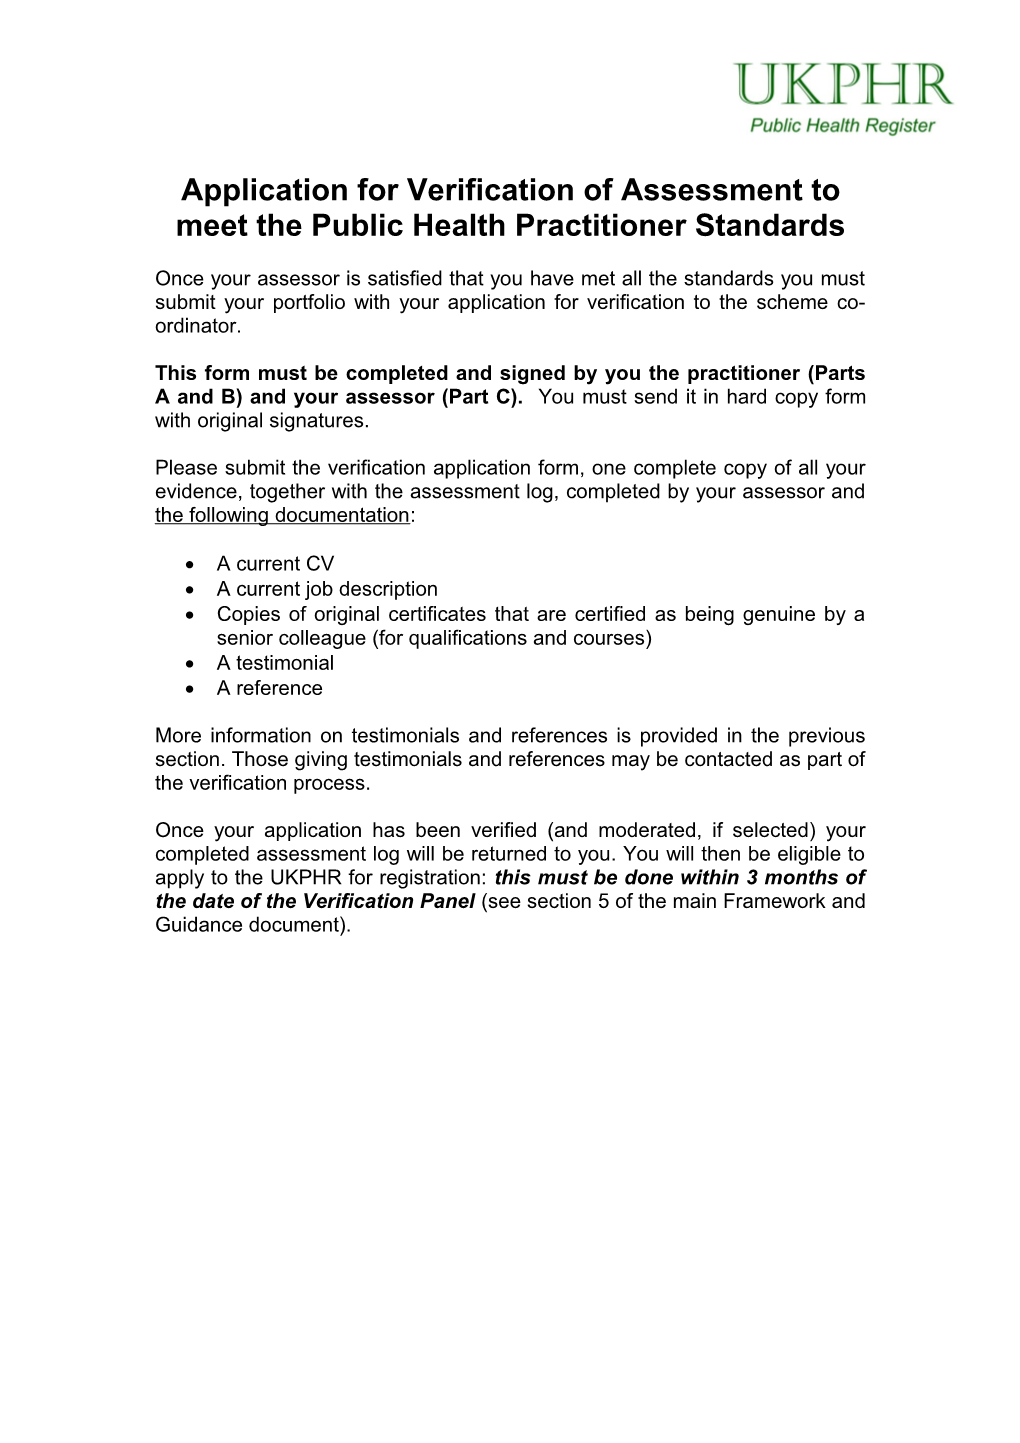 Application for Verification of Assessment to Meet the Public Health Practitioner Standards